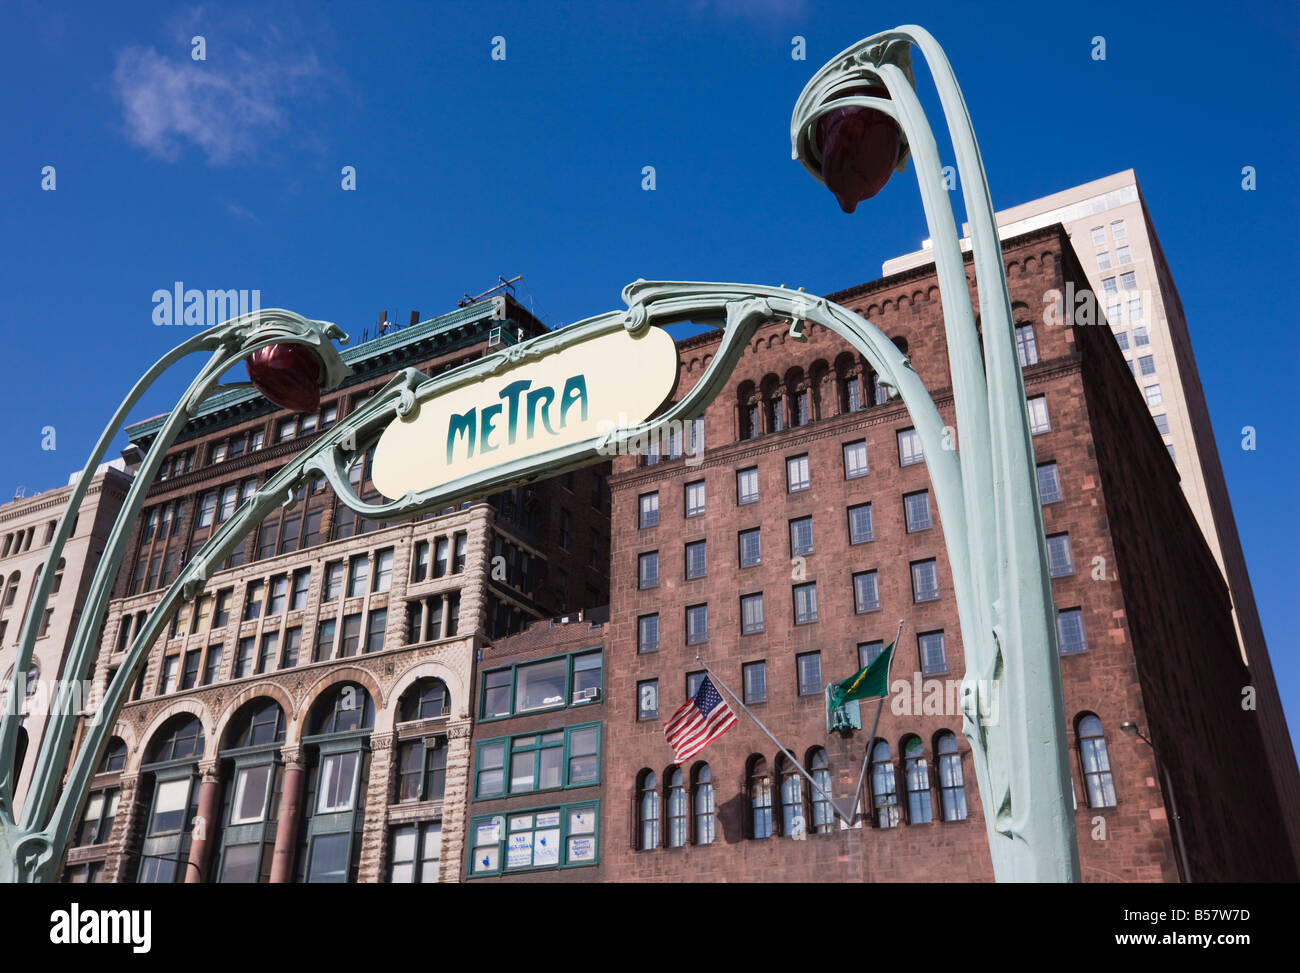 Metra rail system, station sign in the style of the Paris Metro, Chicago, Illinois, United States of America, North America Stock Photo